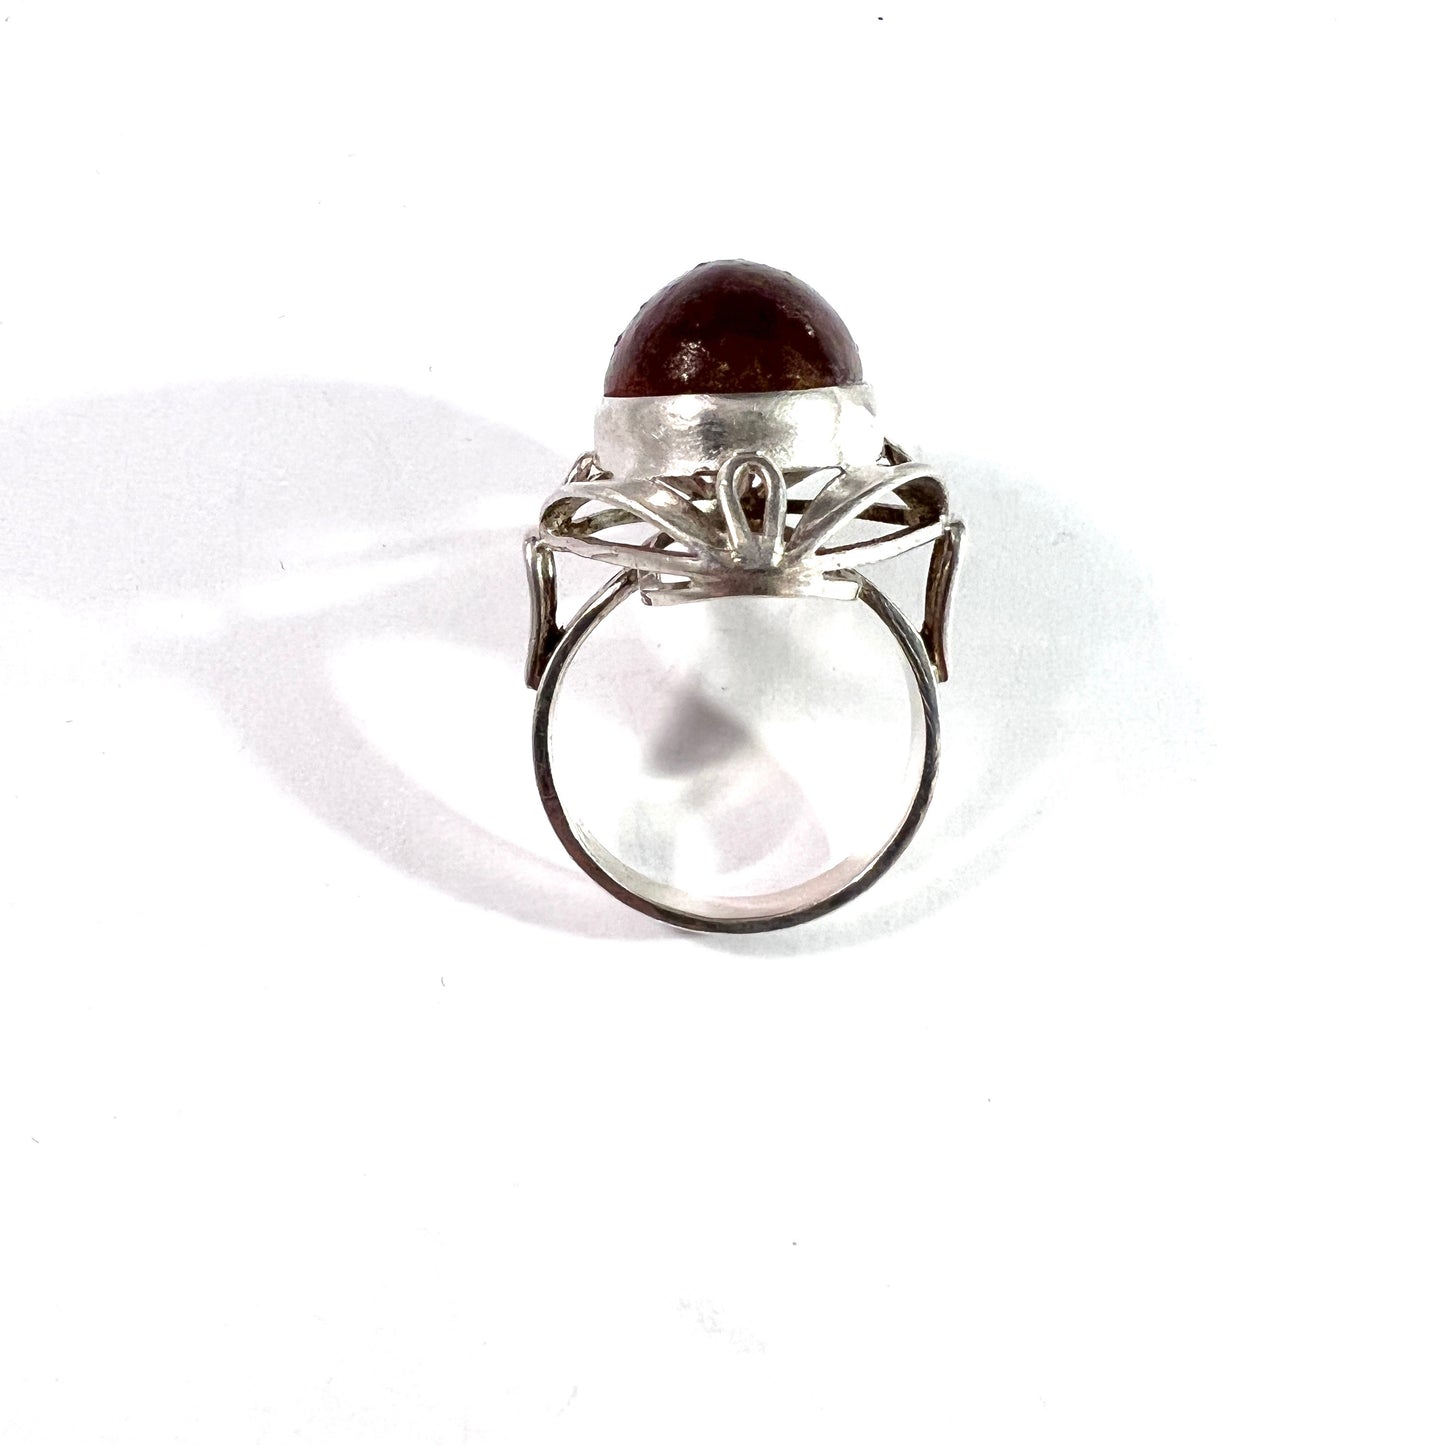 Poland 1960-70s. Vintage Solid Silver Baltic Amber Ring. Maker's Mark.